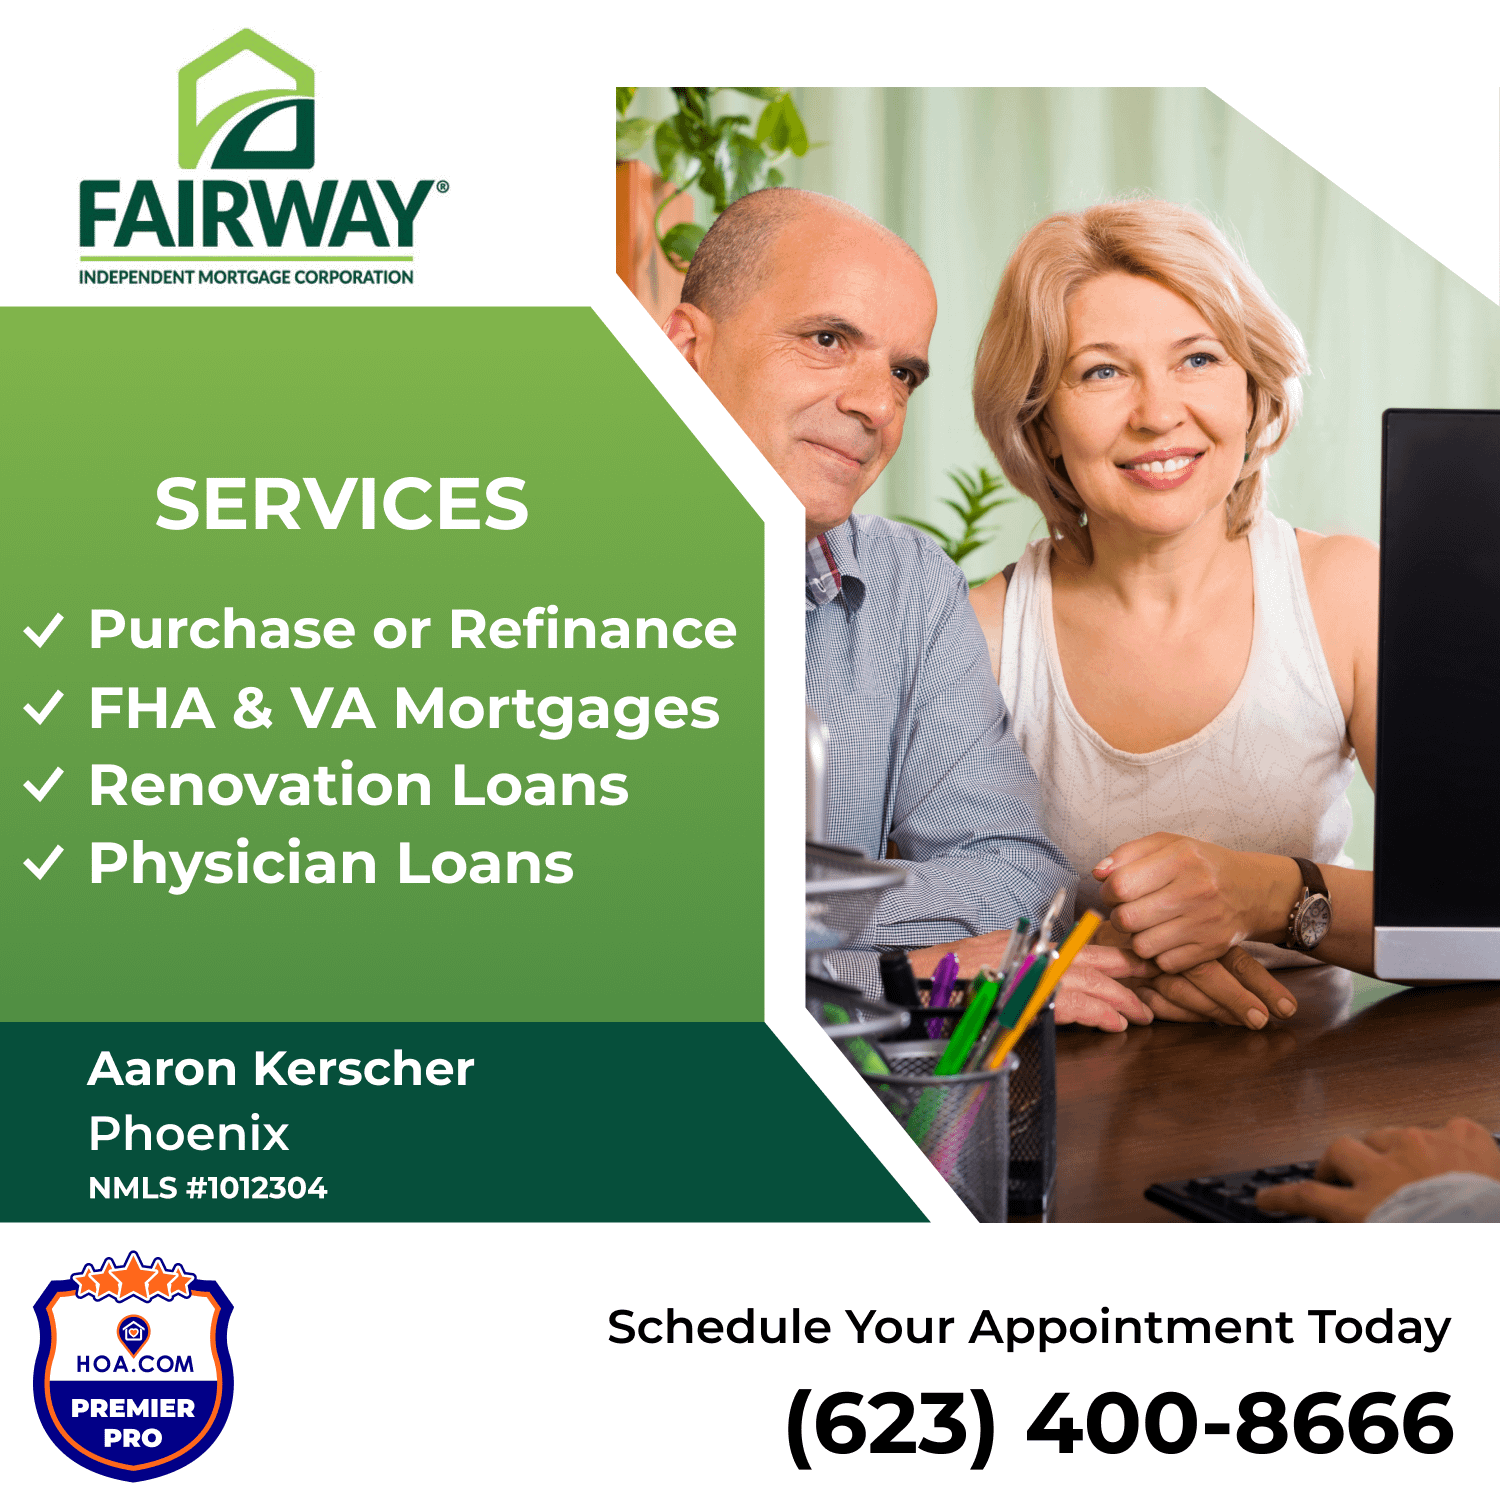 Services offered by Aaron Kerscher with Fairway Independent Mortgage